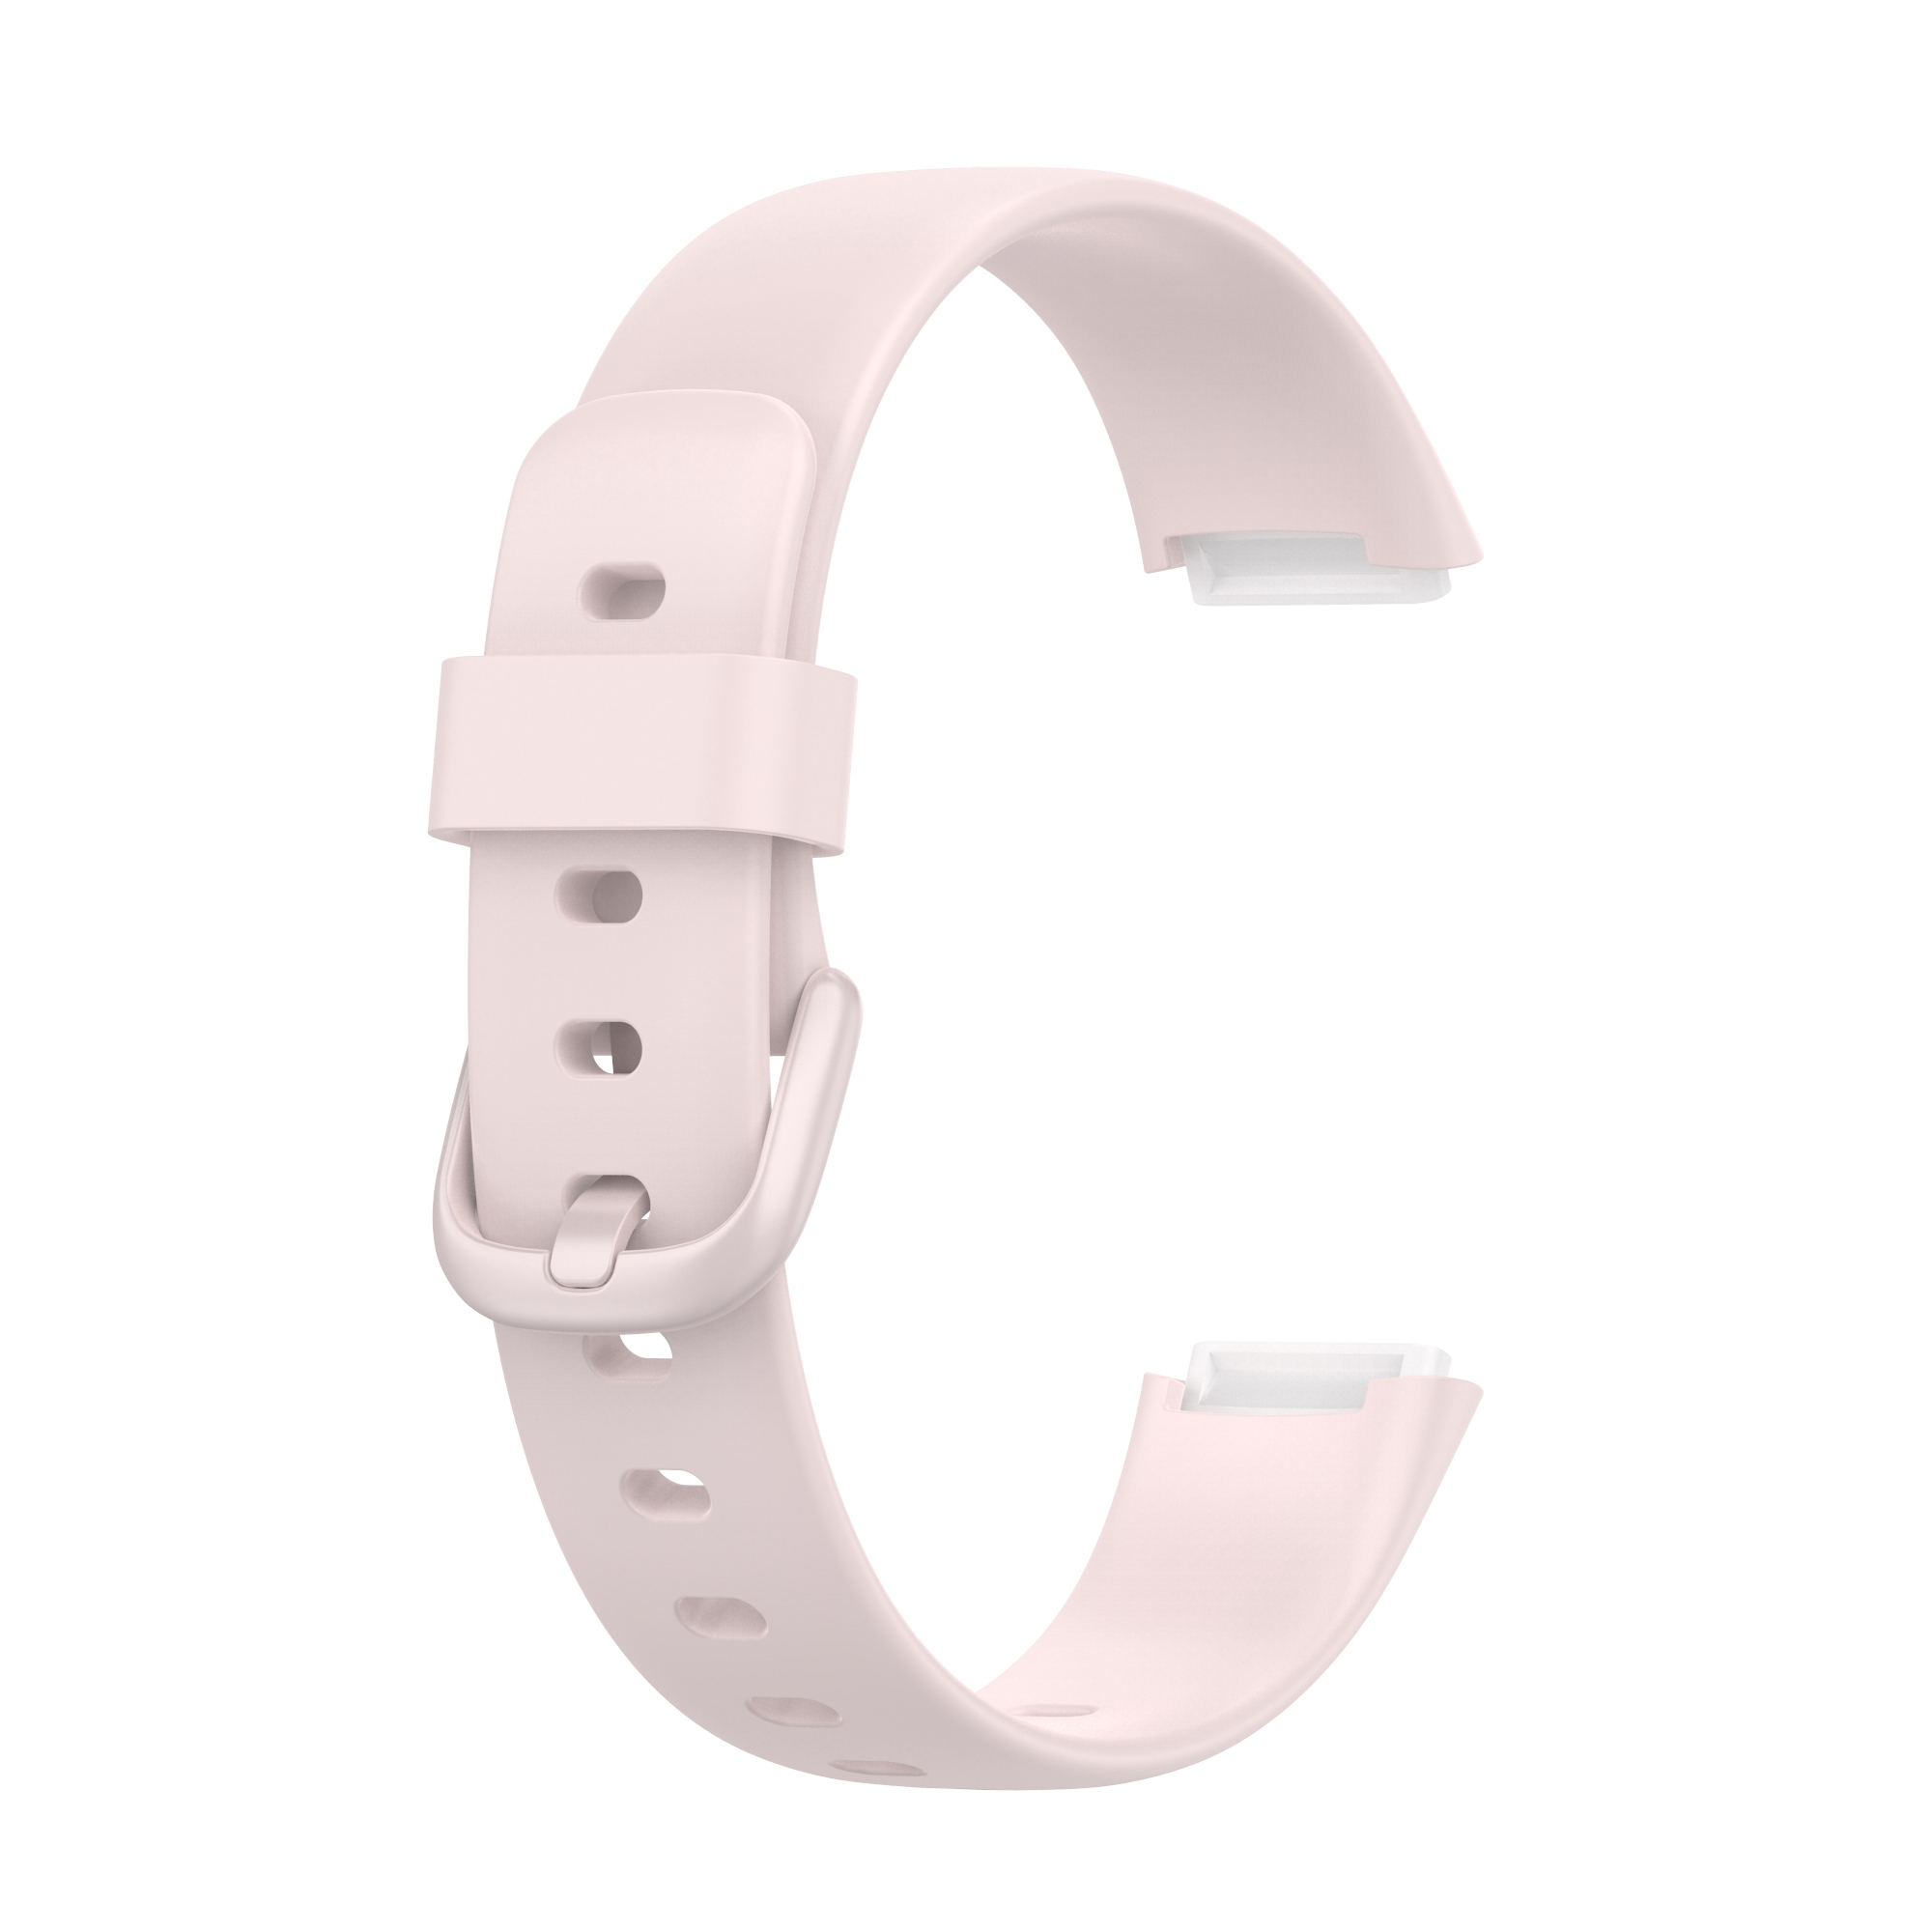 Bakeey-Comfortable-Sweatproof-Soft-Silicone-Watch-Band-Strap-Replacement-for-Fitbit-Luxe-1868080-20